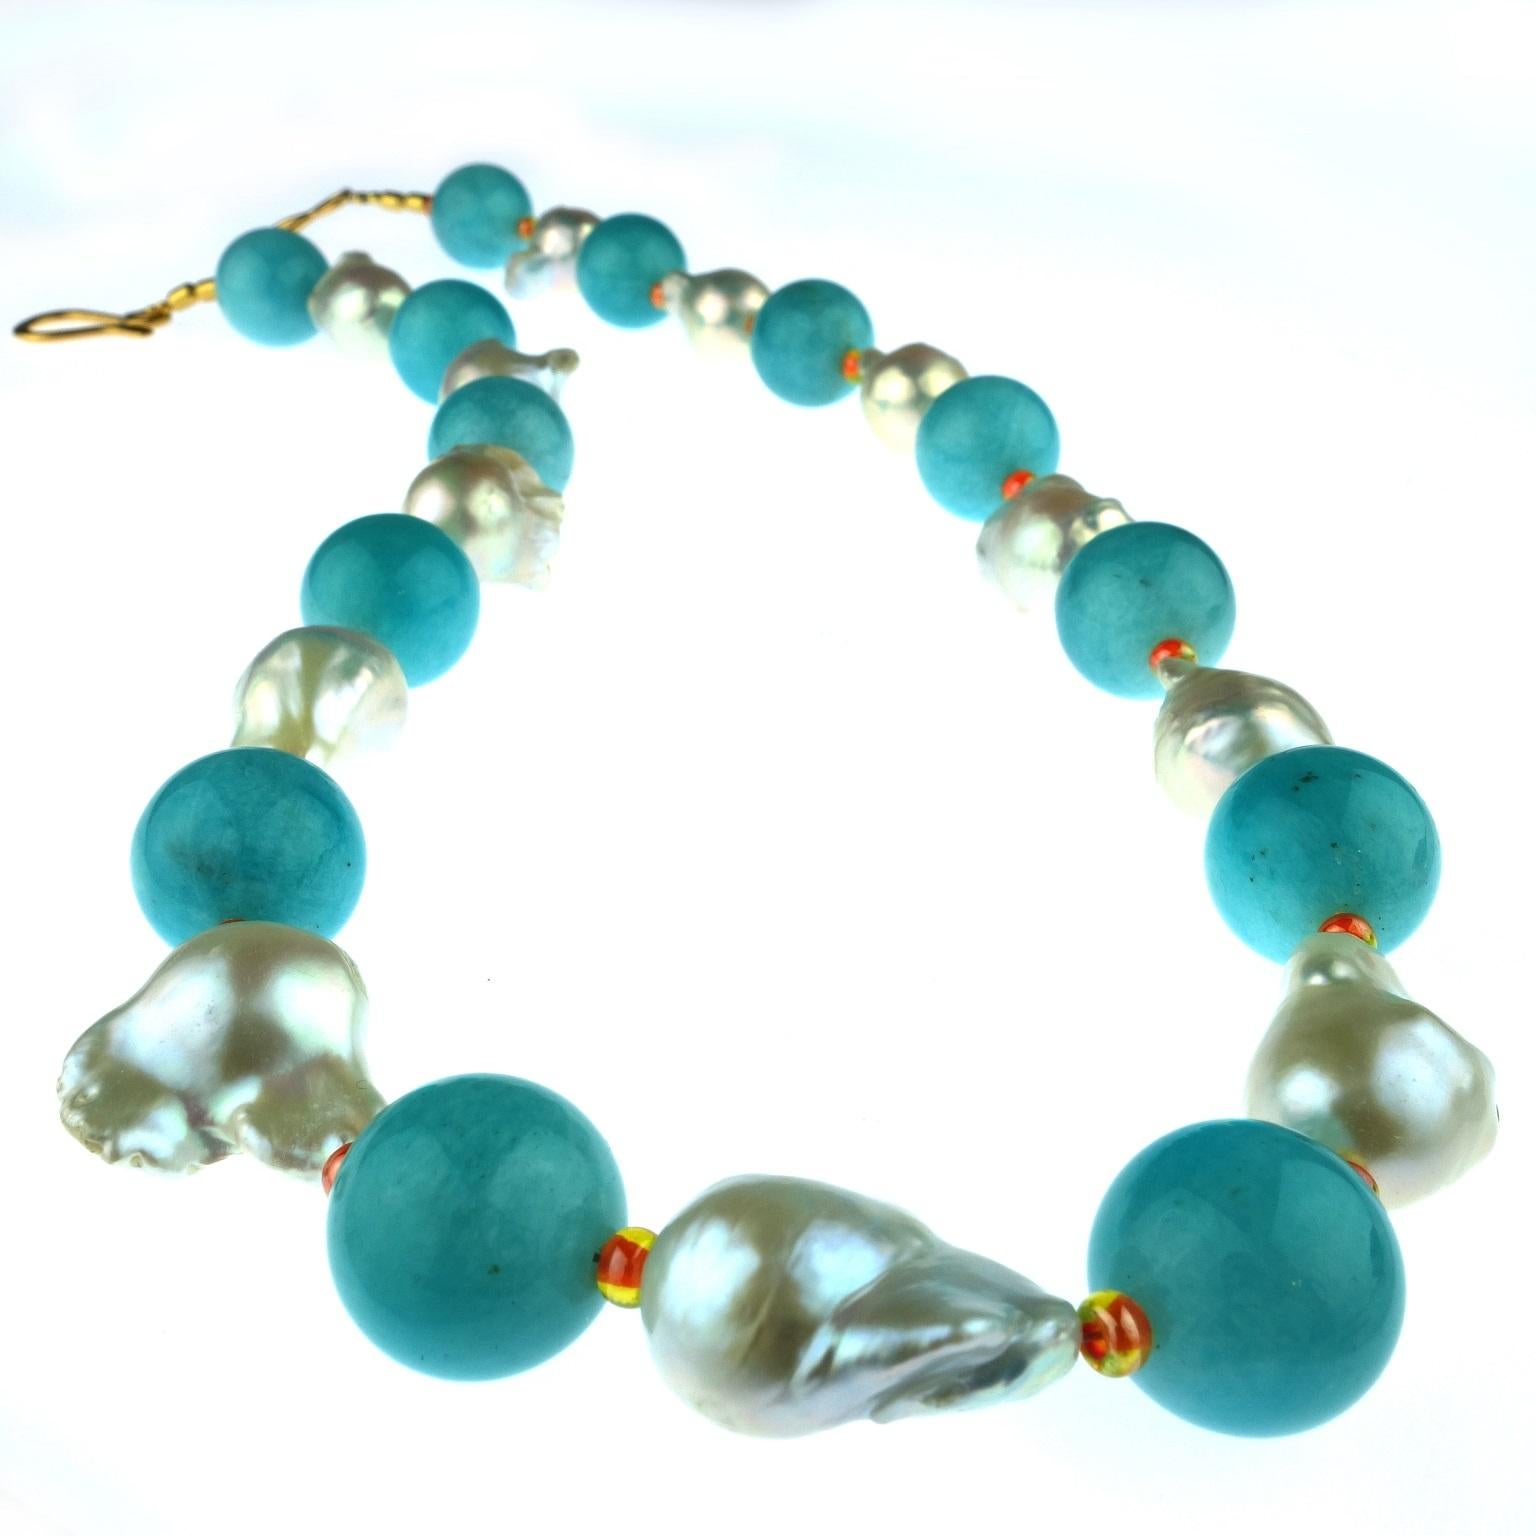 Own the jewelry you wish for

Custom made Summer necklace of large funky white Baroque Pearls and large highly polished Amazonite (16MM) accented with orange Czech crystal beads.  How fun is that?!  Wear this all summer, in any warm climate. This